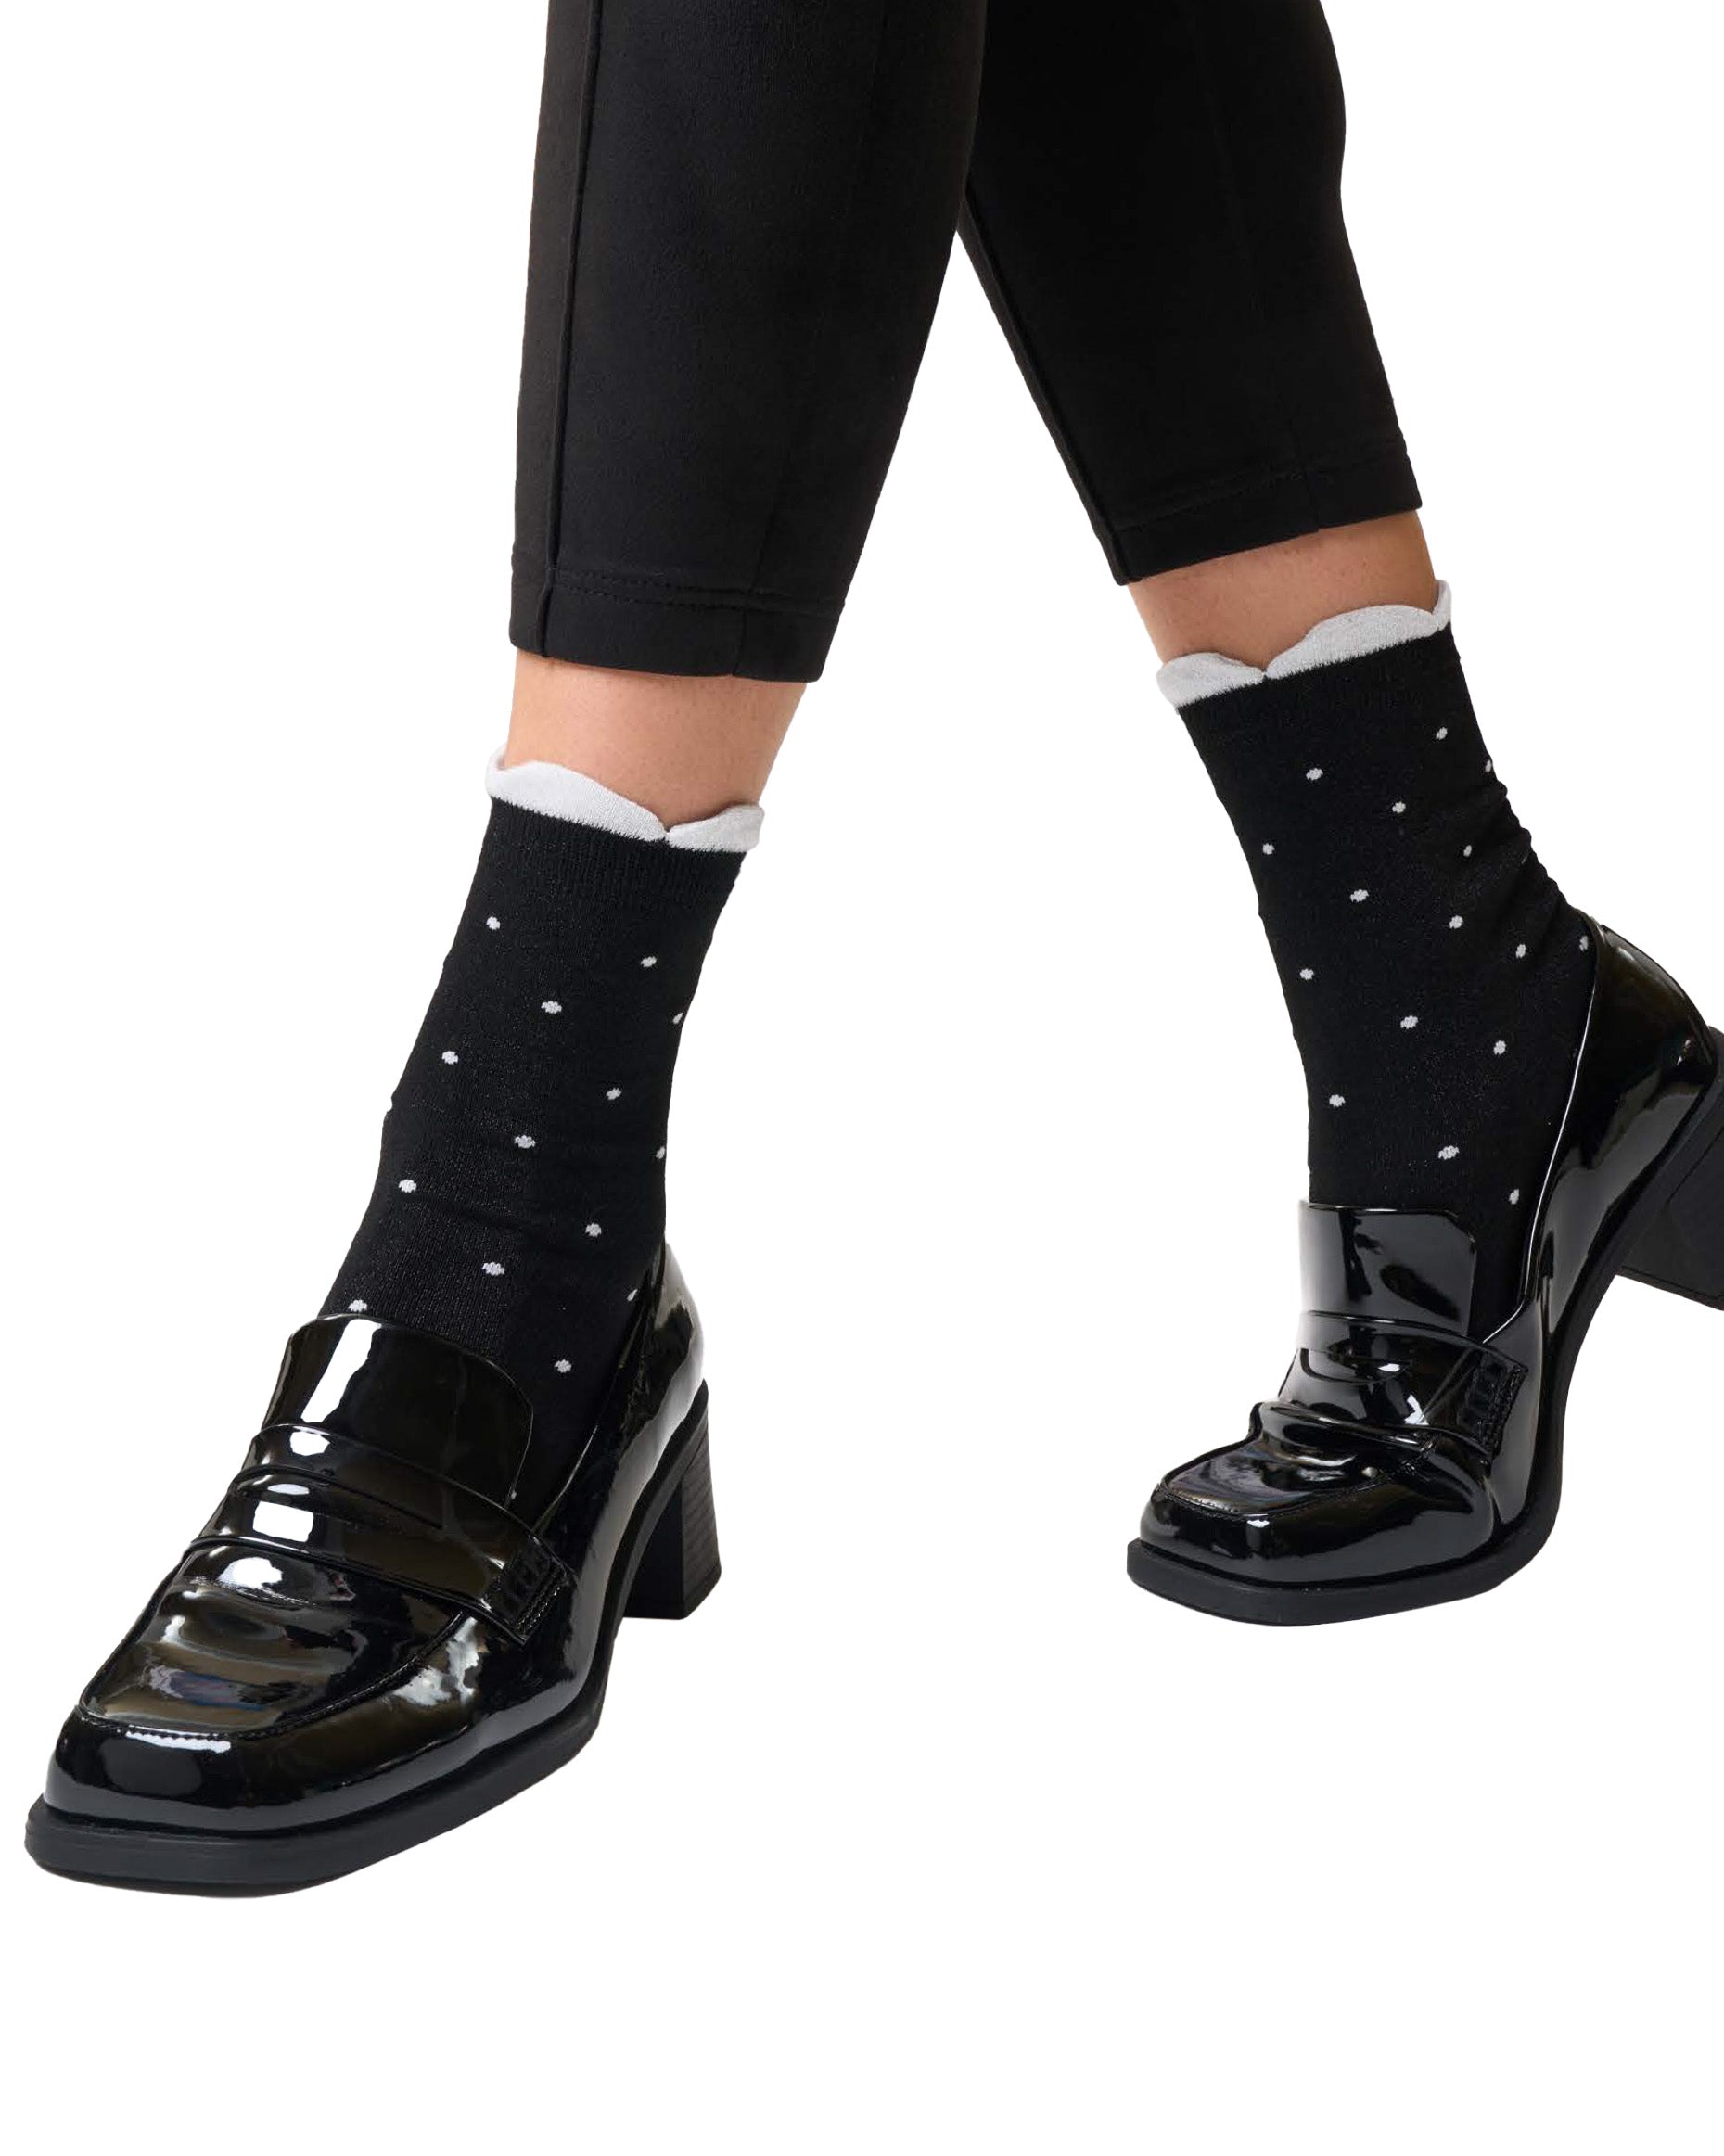 SiSi Smile Cazino - Black viscose mix ankle socks with an all over silver lamé polka dot pattern, silver comfort edge with gathered stitching.